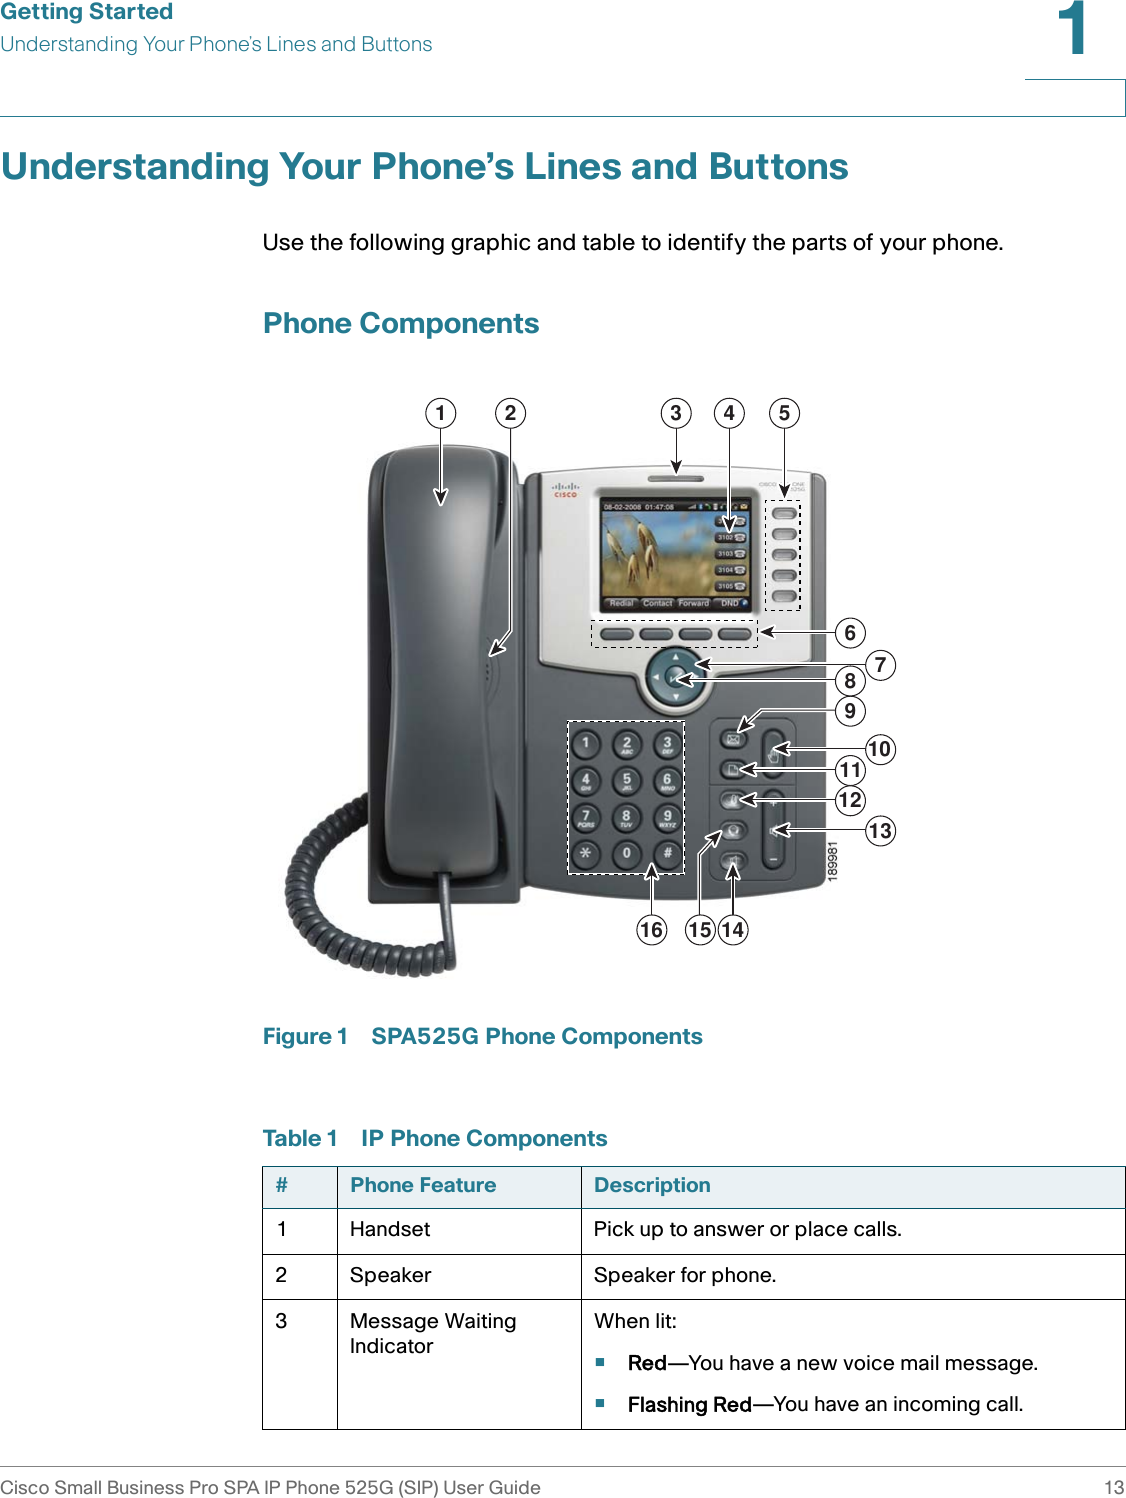 Getting StartedUnderstanding Your Phone’s Lines and ButtonsCisco Small Business Pro SPA IP Phone 525G (SIP) User Guide 131 Understanding Your Phone’s Lines and ButtonsUse the following graphic and table to identify the parts of your phone.Phone ComponentsFigure 1 SPA525G Phone ComponentsTable 1 IP Phone Components#Phone Feature Description1 Handset Pick up to answer or place calls.2 Speaker Speaker for phone.3 Message Waiting IndicatorWhen lit:•Red—You have a new voice mail message.•Flashing Red—You have an incoming call.1 2 3 54146101311129781516